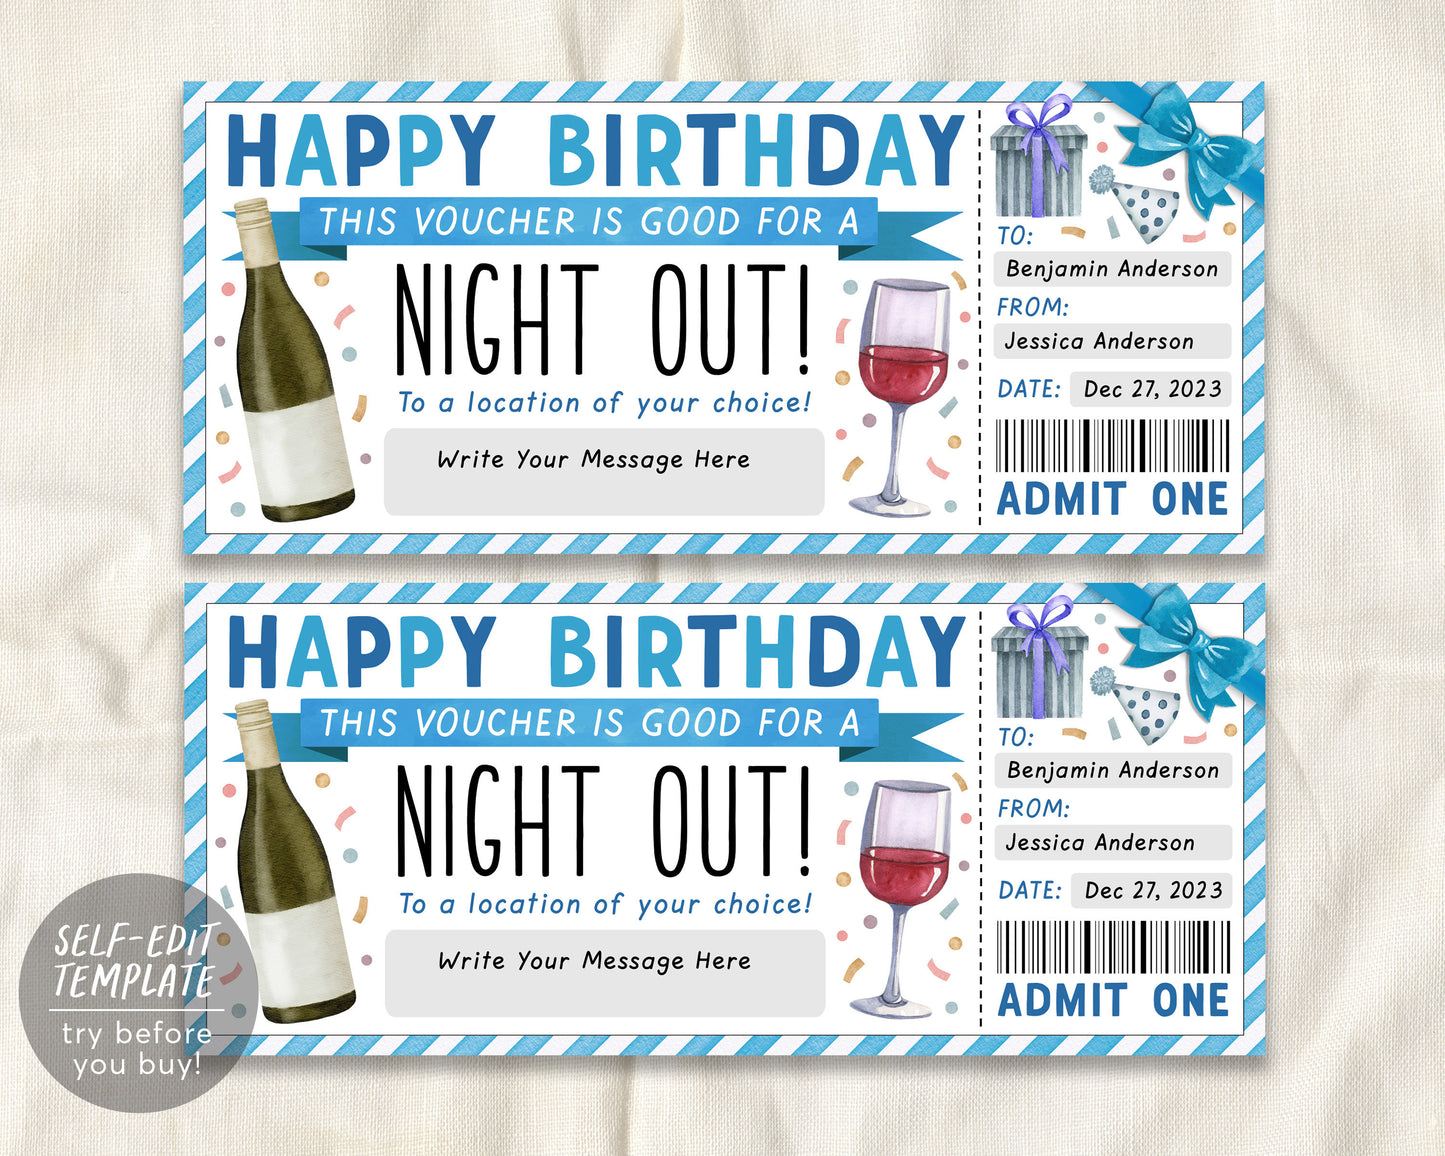 Birthday Night Out Gift Voucher Editable Template